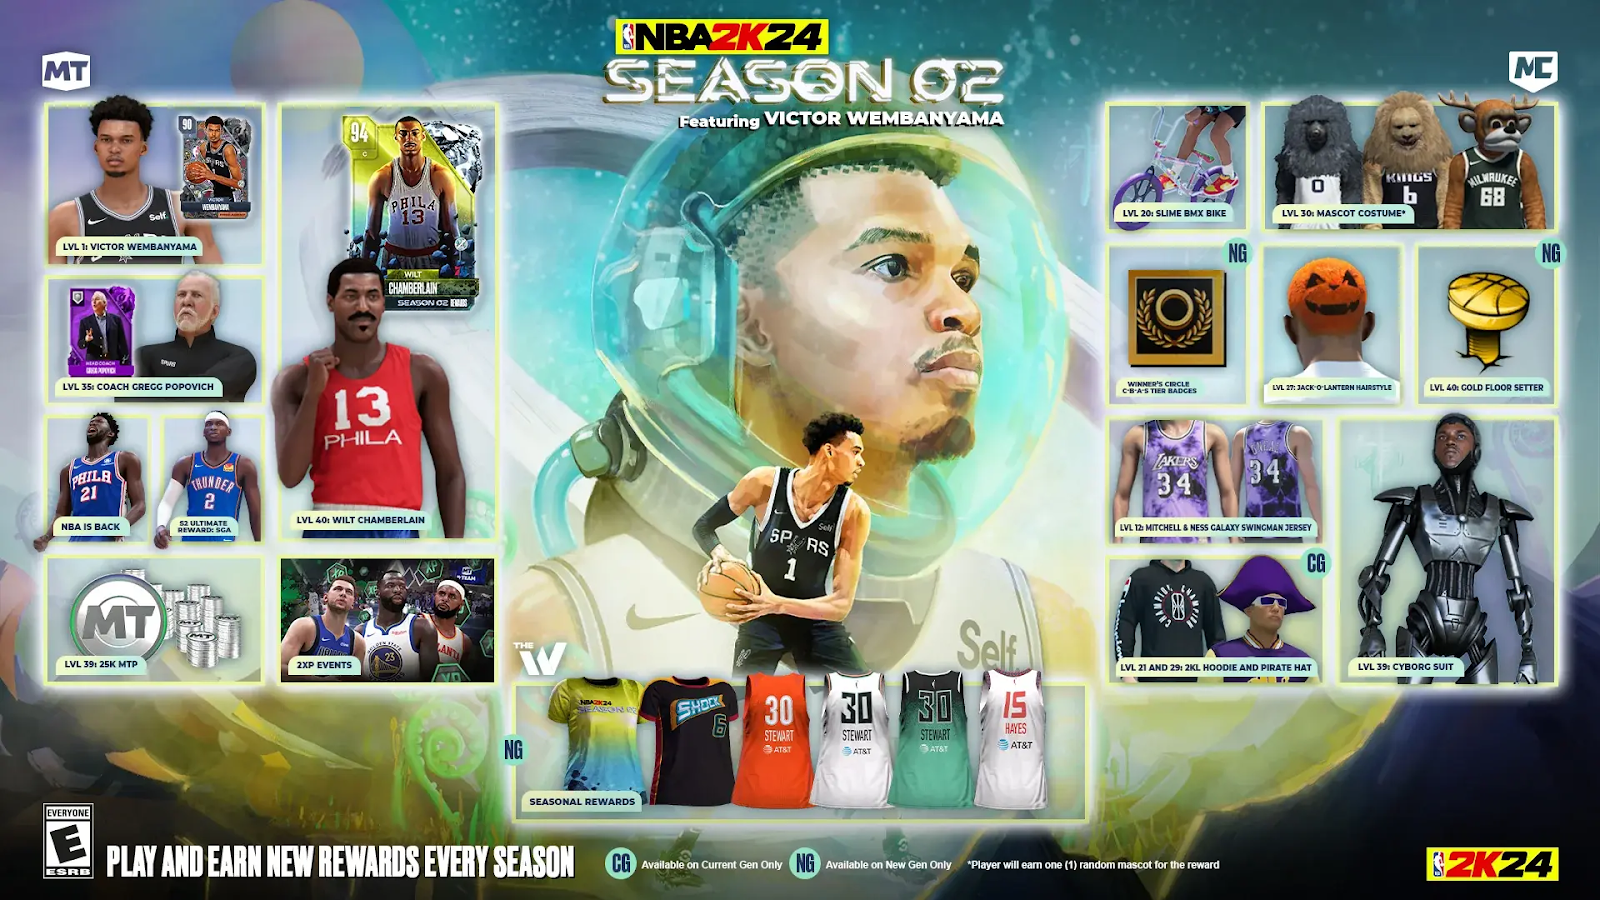 NBA(R) 2K24 celebrates the season tip-off with significant savings across four key platform